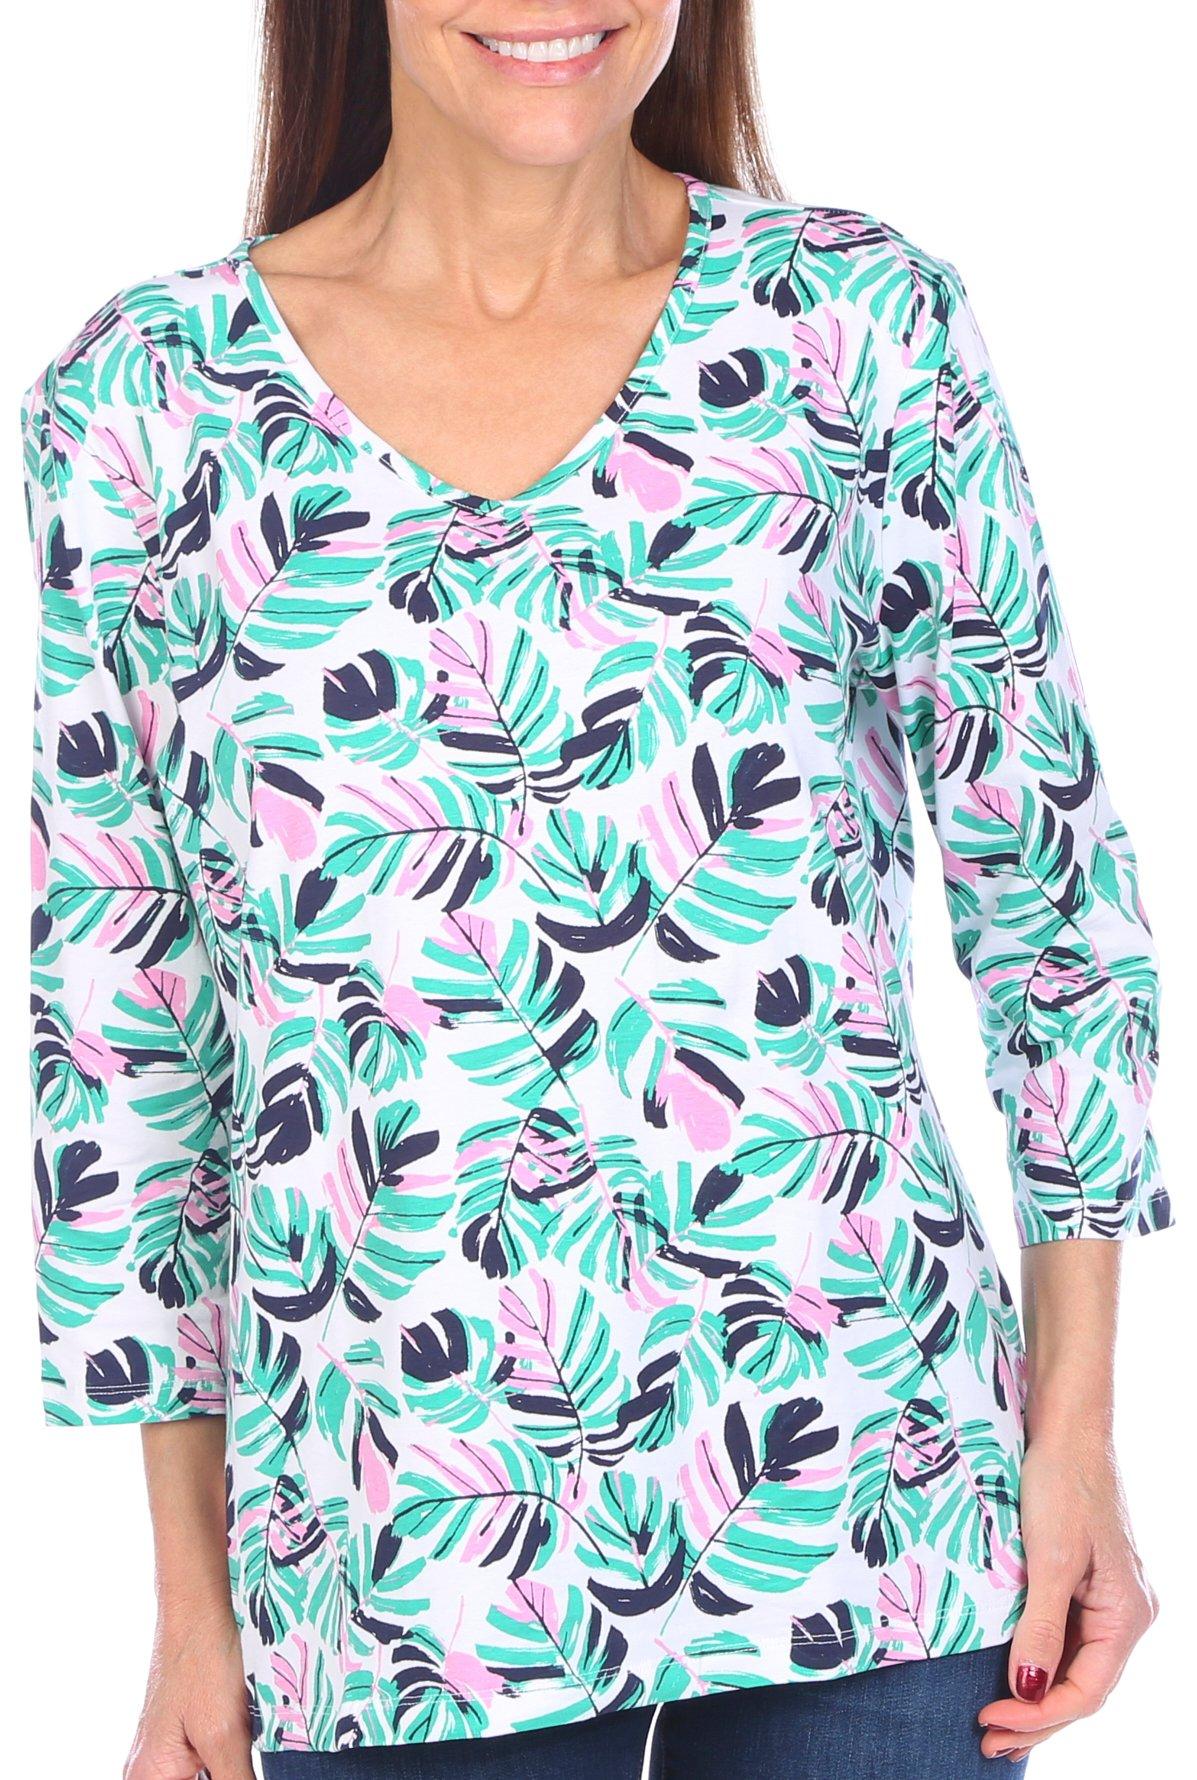 Coral Bay Womens Fronds Print V-Neck 3/4 Sleeve